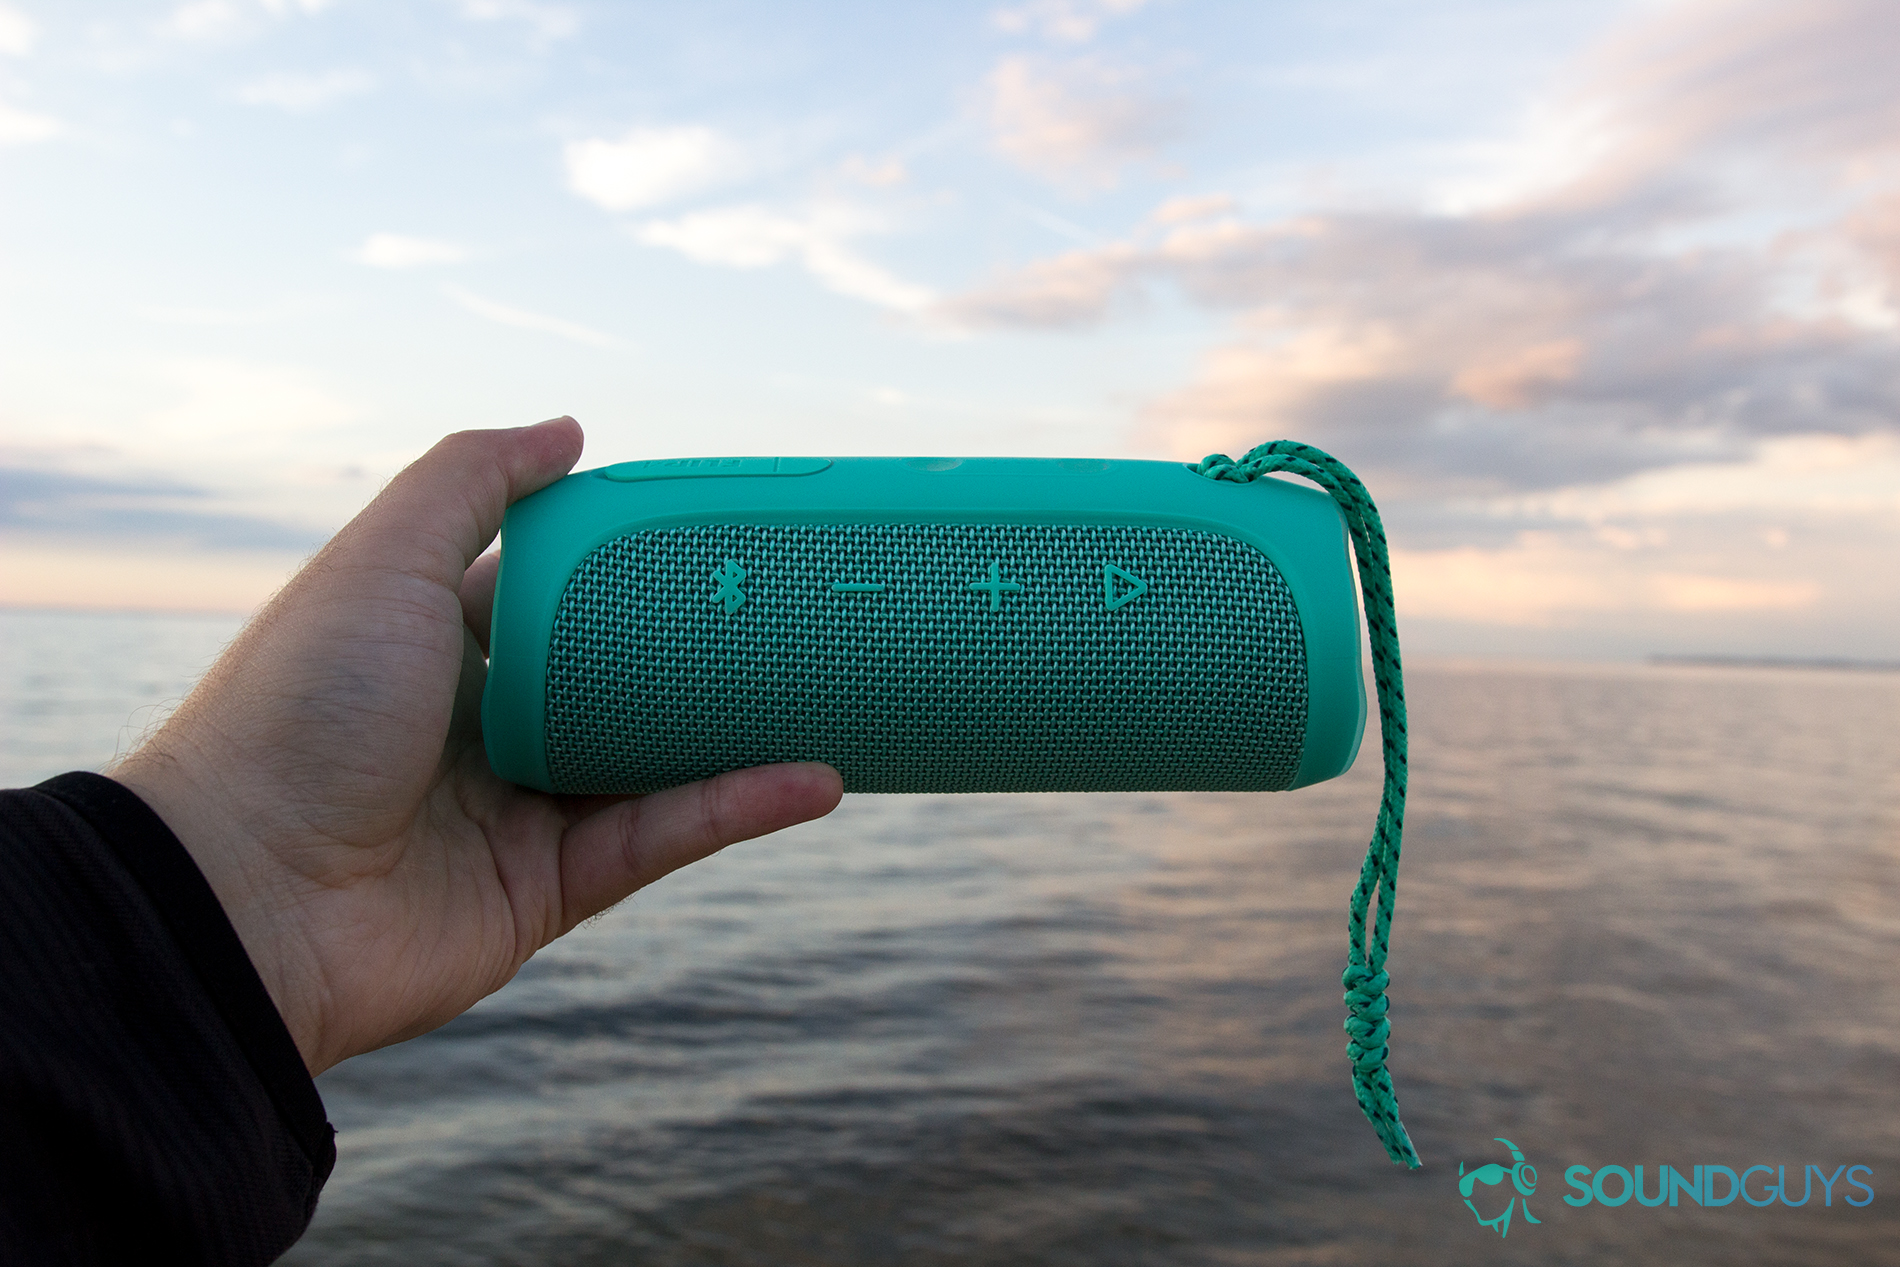 The JBL Flip 4 with the playback controls showing. It's in the hand and over an ocean background at sunset.